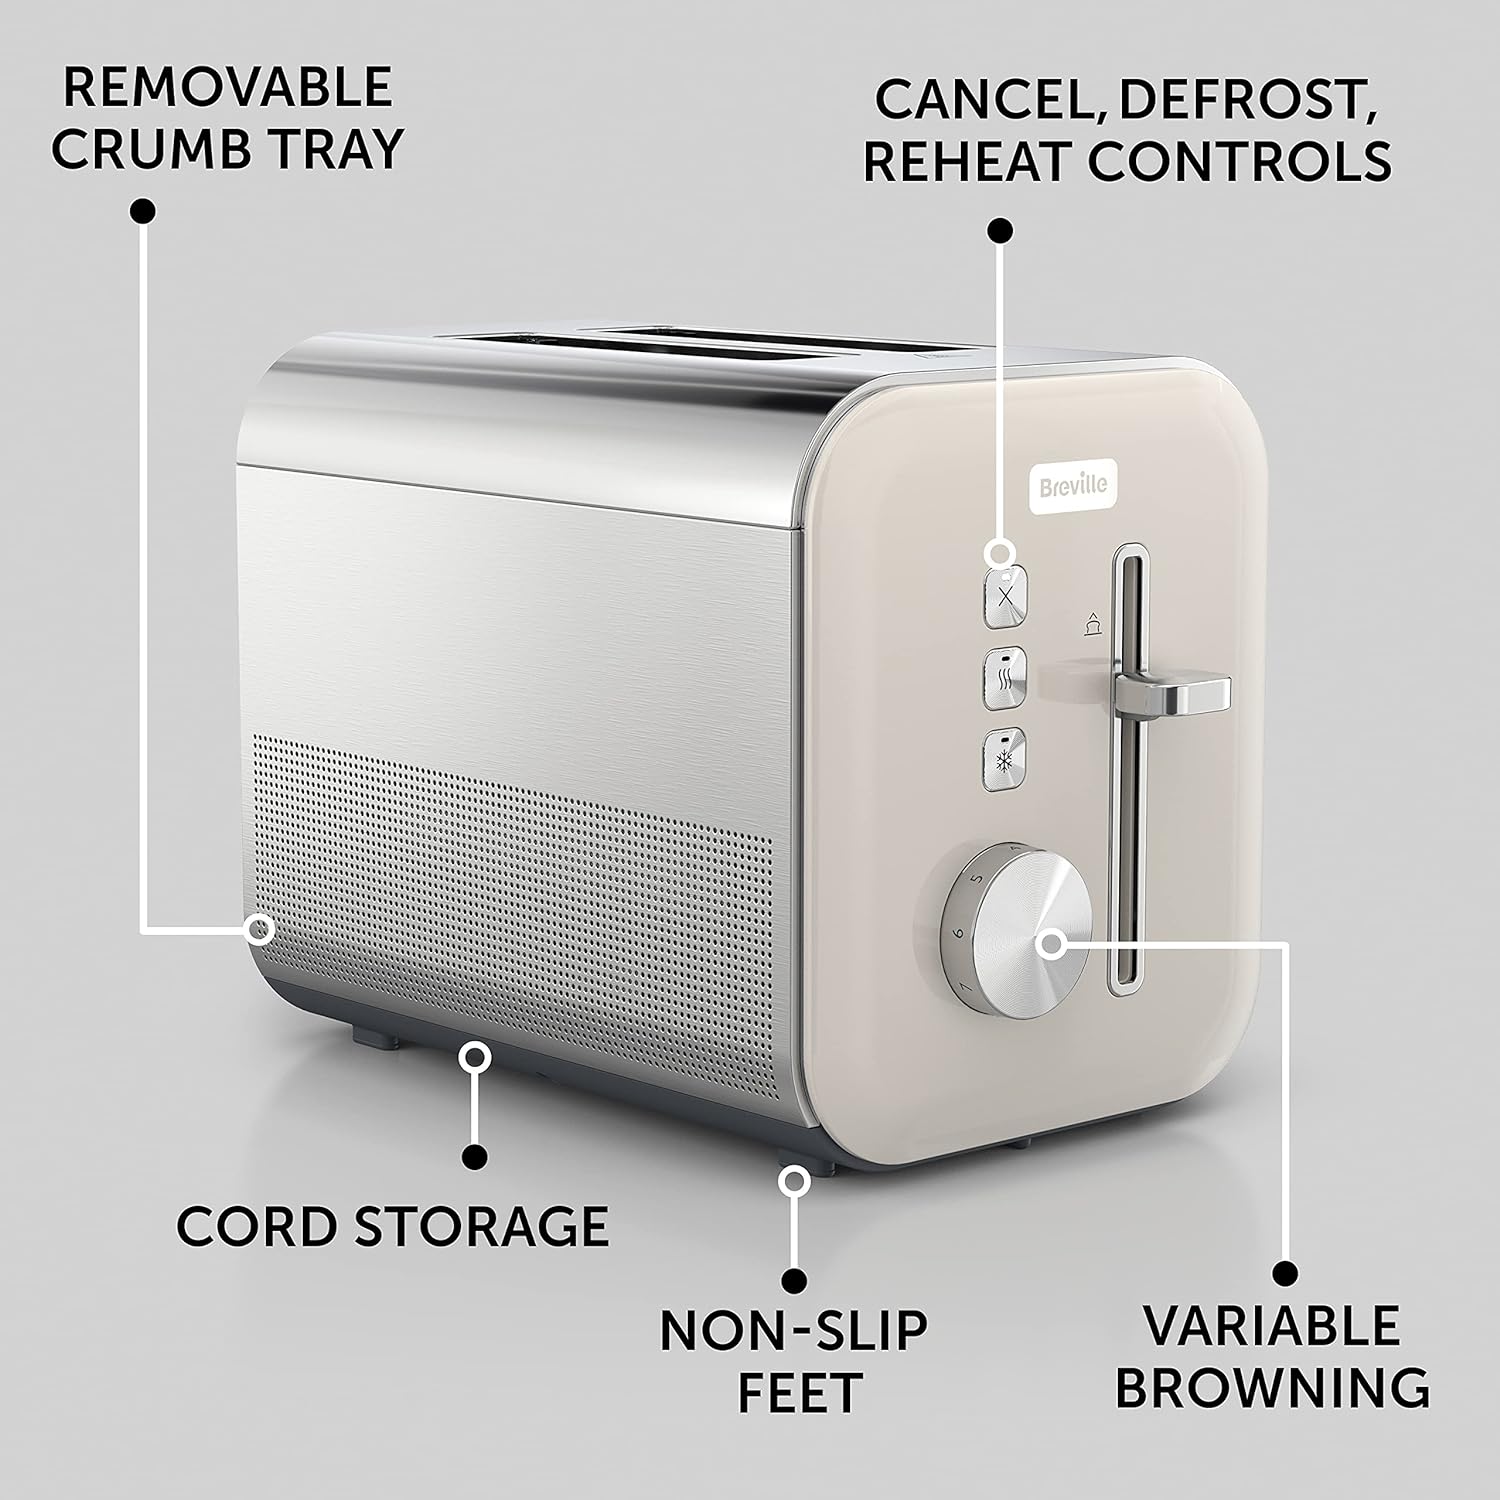 Breville High Gloss 2-Slice Toaster with High-Lift & Wide Slots | Cream & Stainless Steel [VTT967]